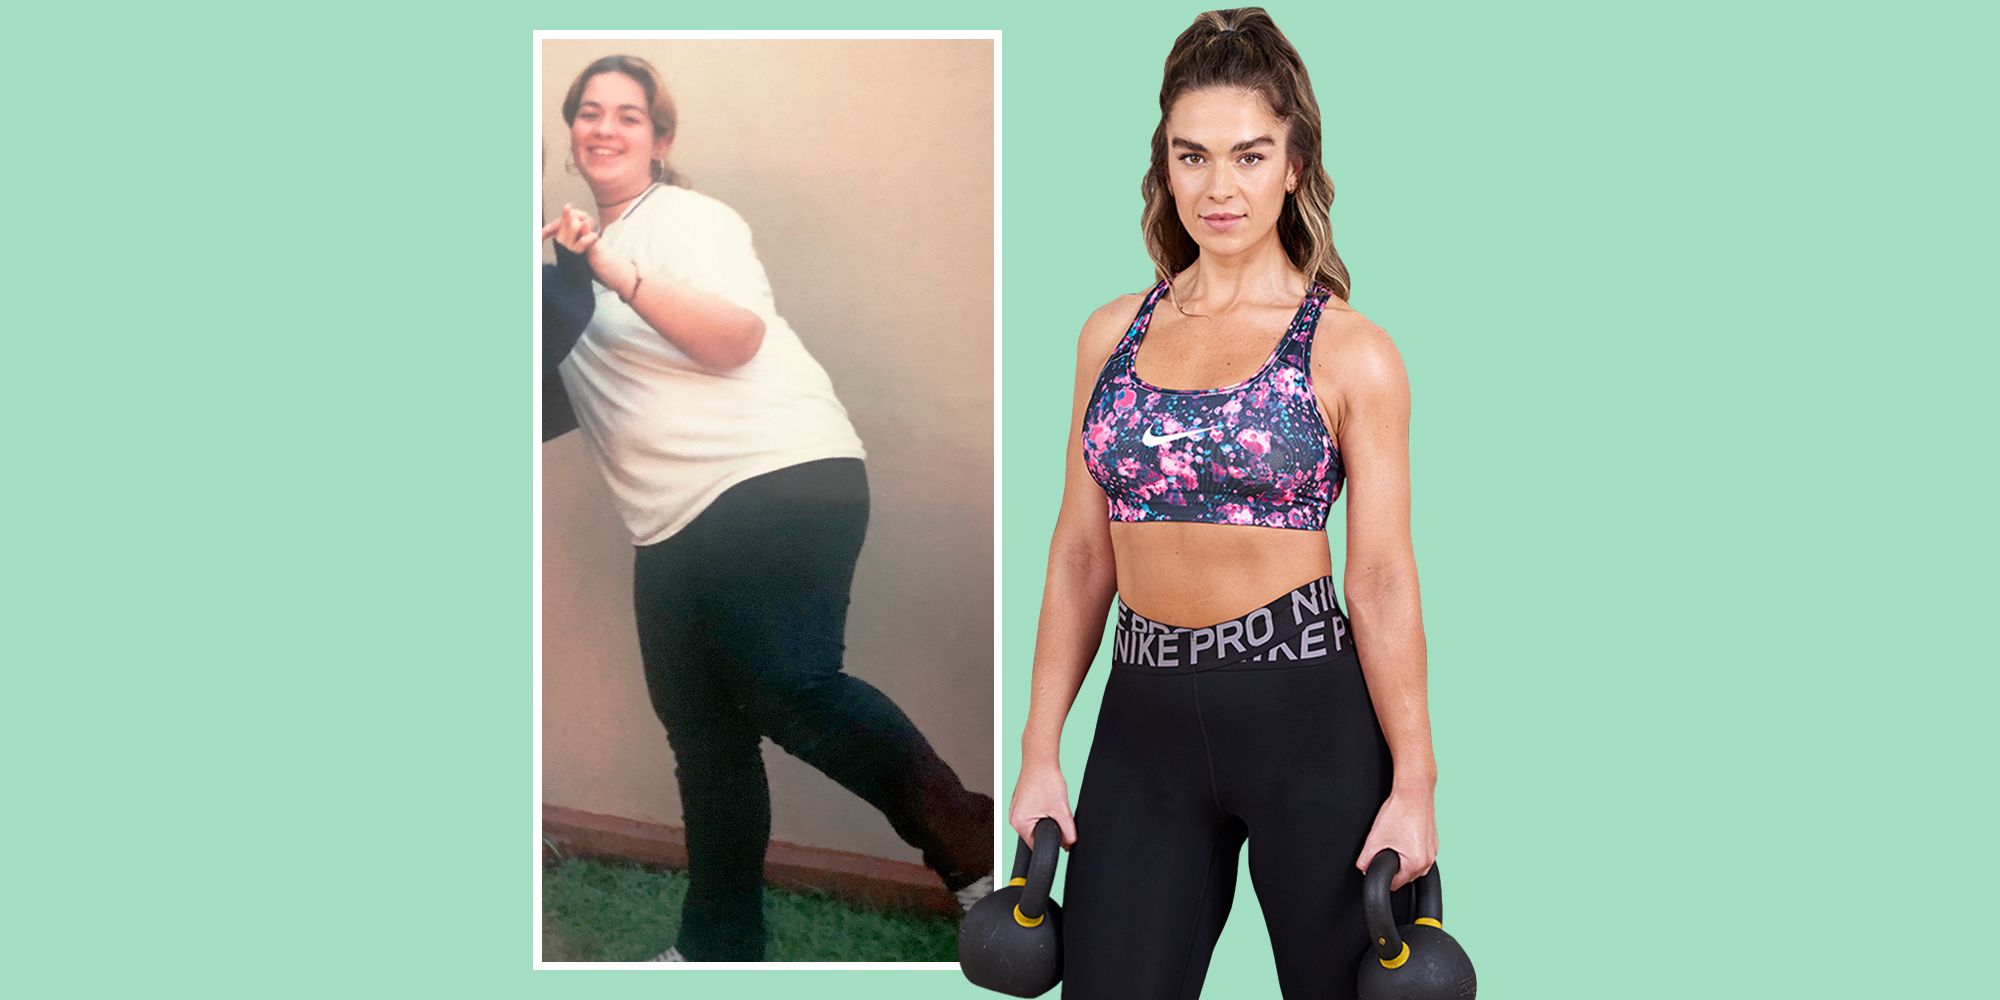 Sophie lost 24kgs with The Lady Shake